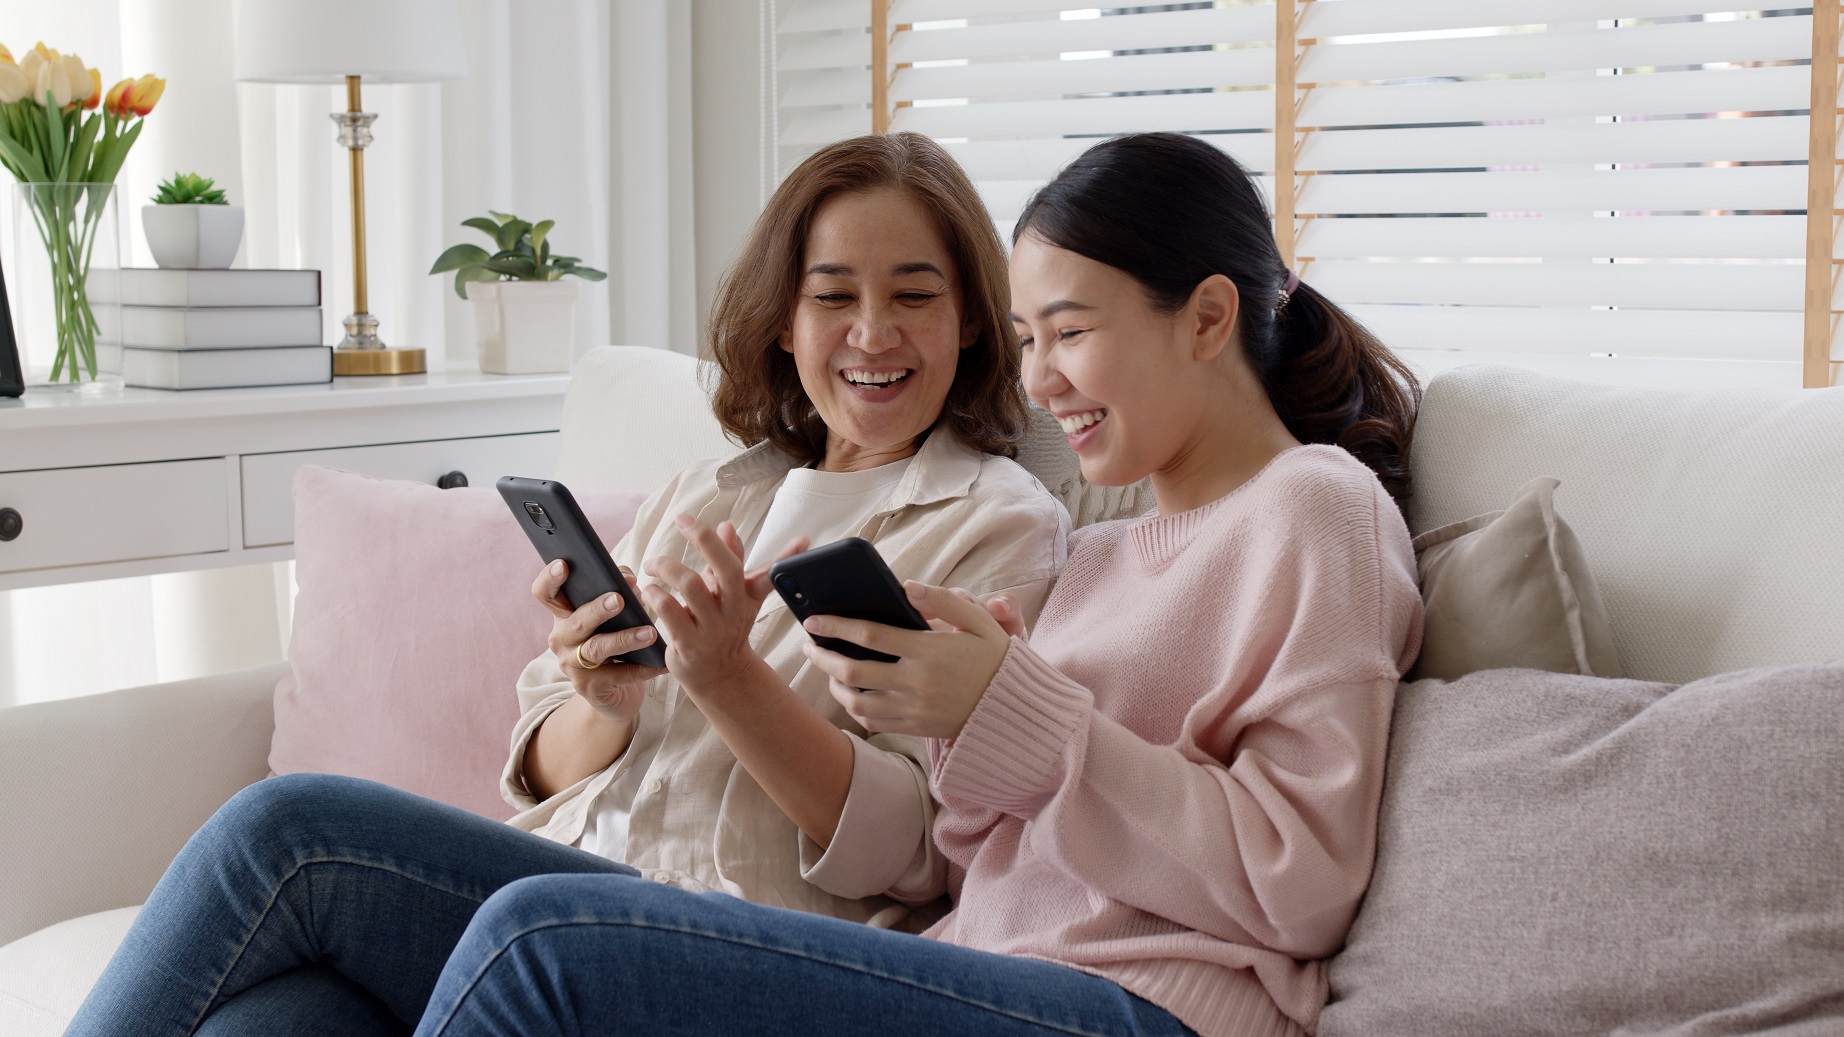 Mother and daughter sitting on sofa smiling while looking at phone